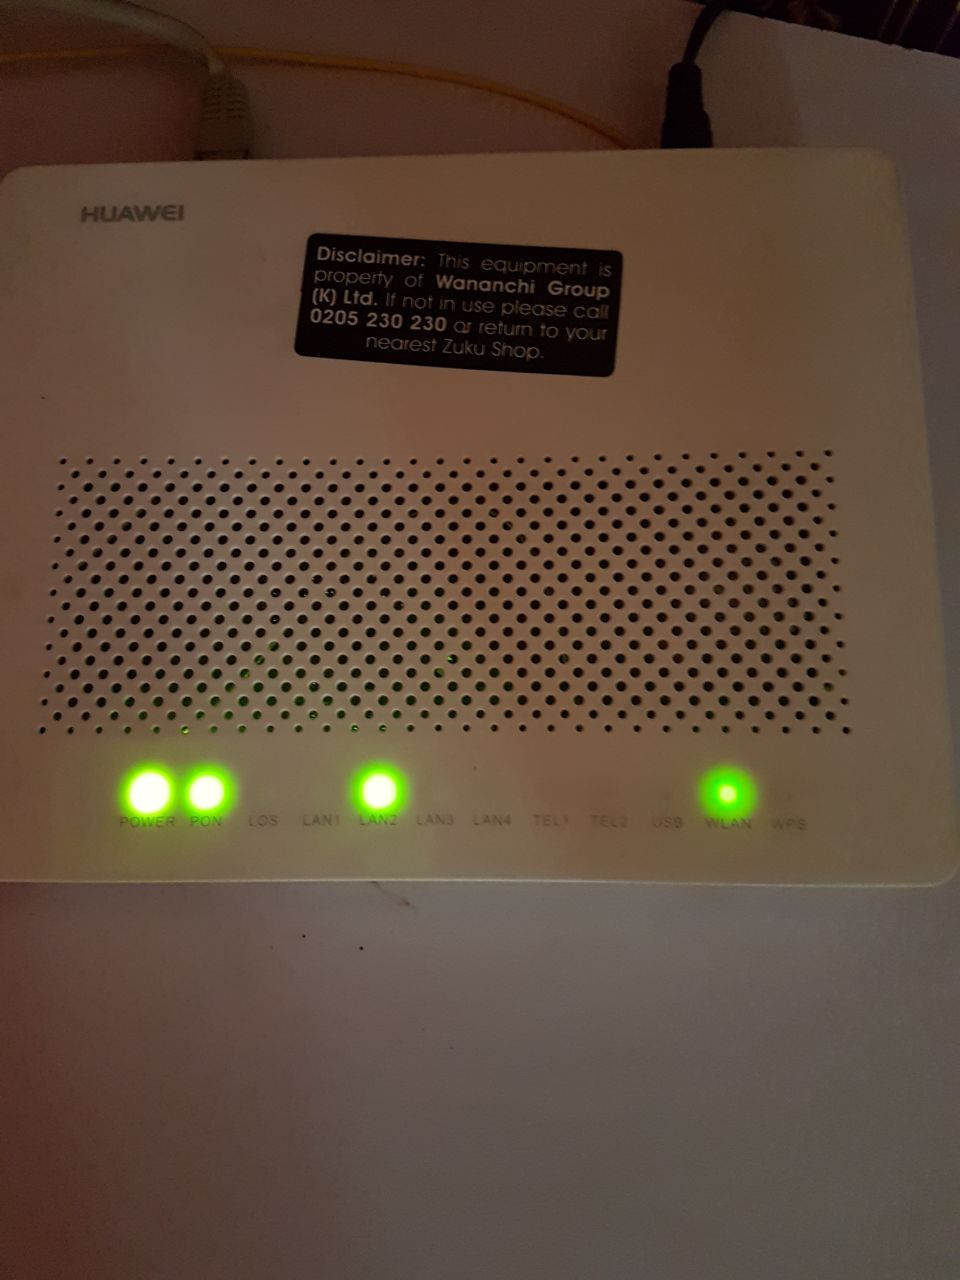 effort Peninsula forest Zuku on Twitter: "@BK_254 Hello Mr Kirathe, please confirm status of LOS  and PON lights on WiFi router. *AM" / Twitter